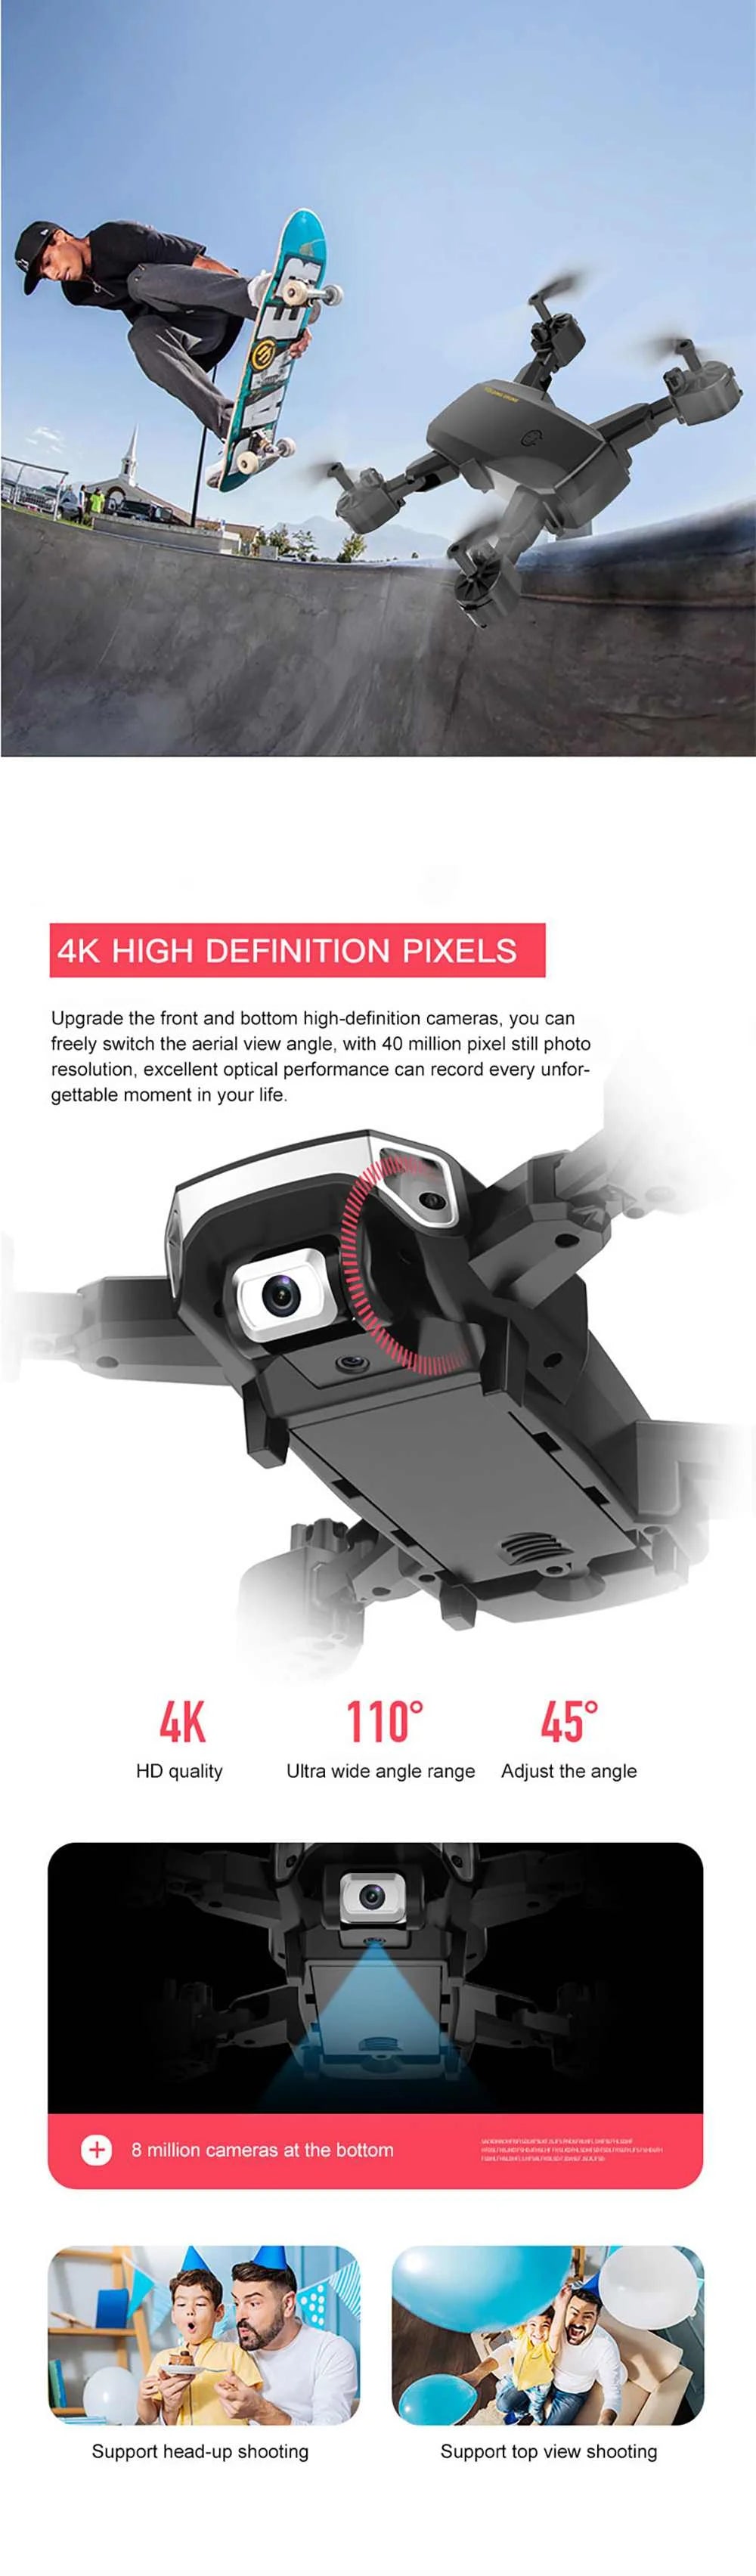 Eachine S60 Mini Drone, 4k high definition pixels upgrade the front bottom high-definition